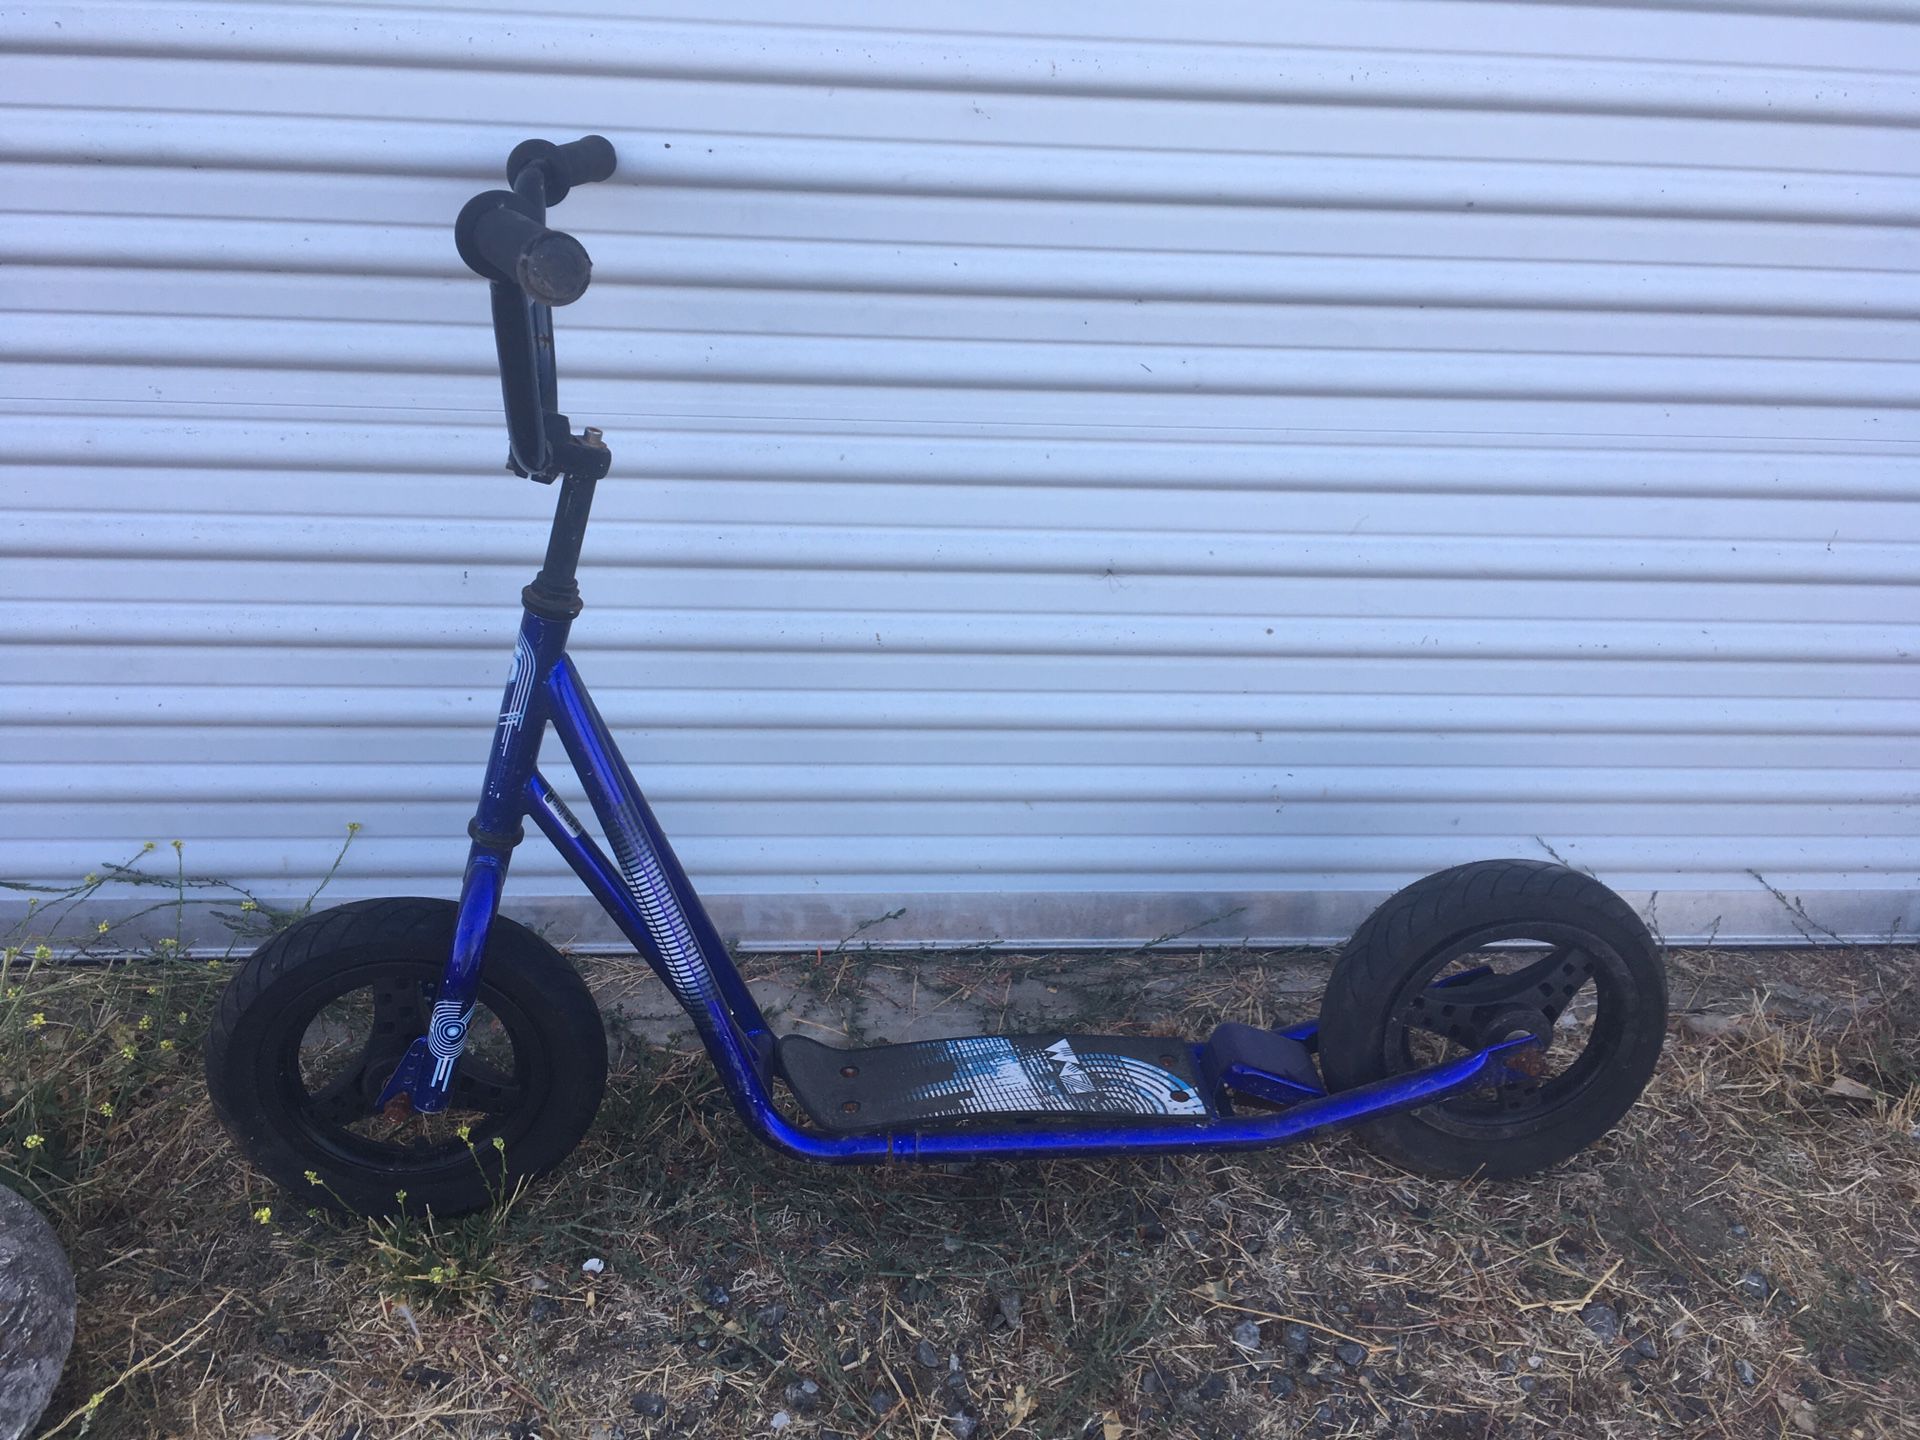 Child scooter